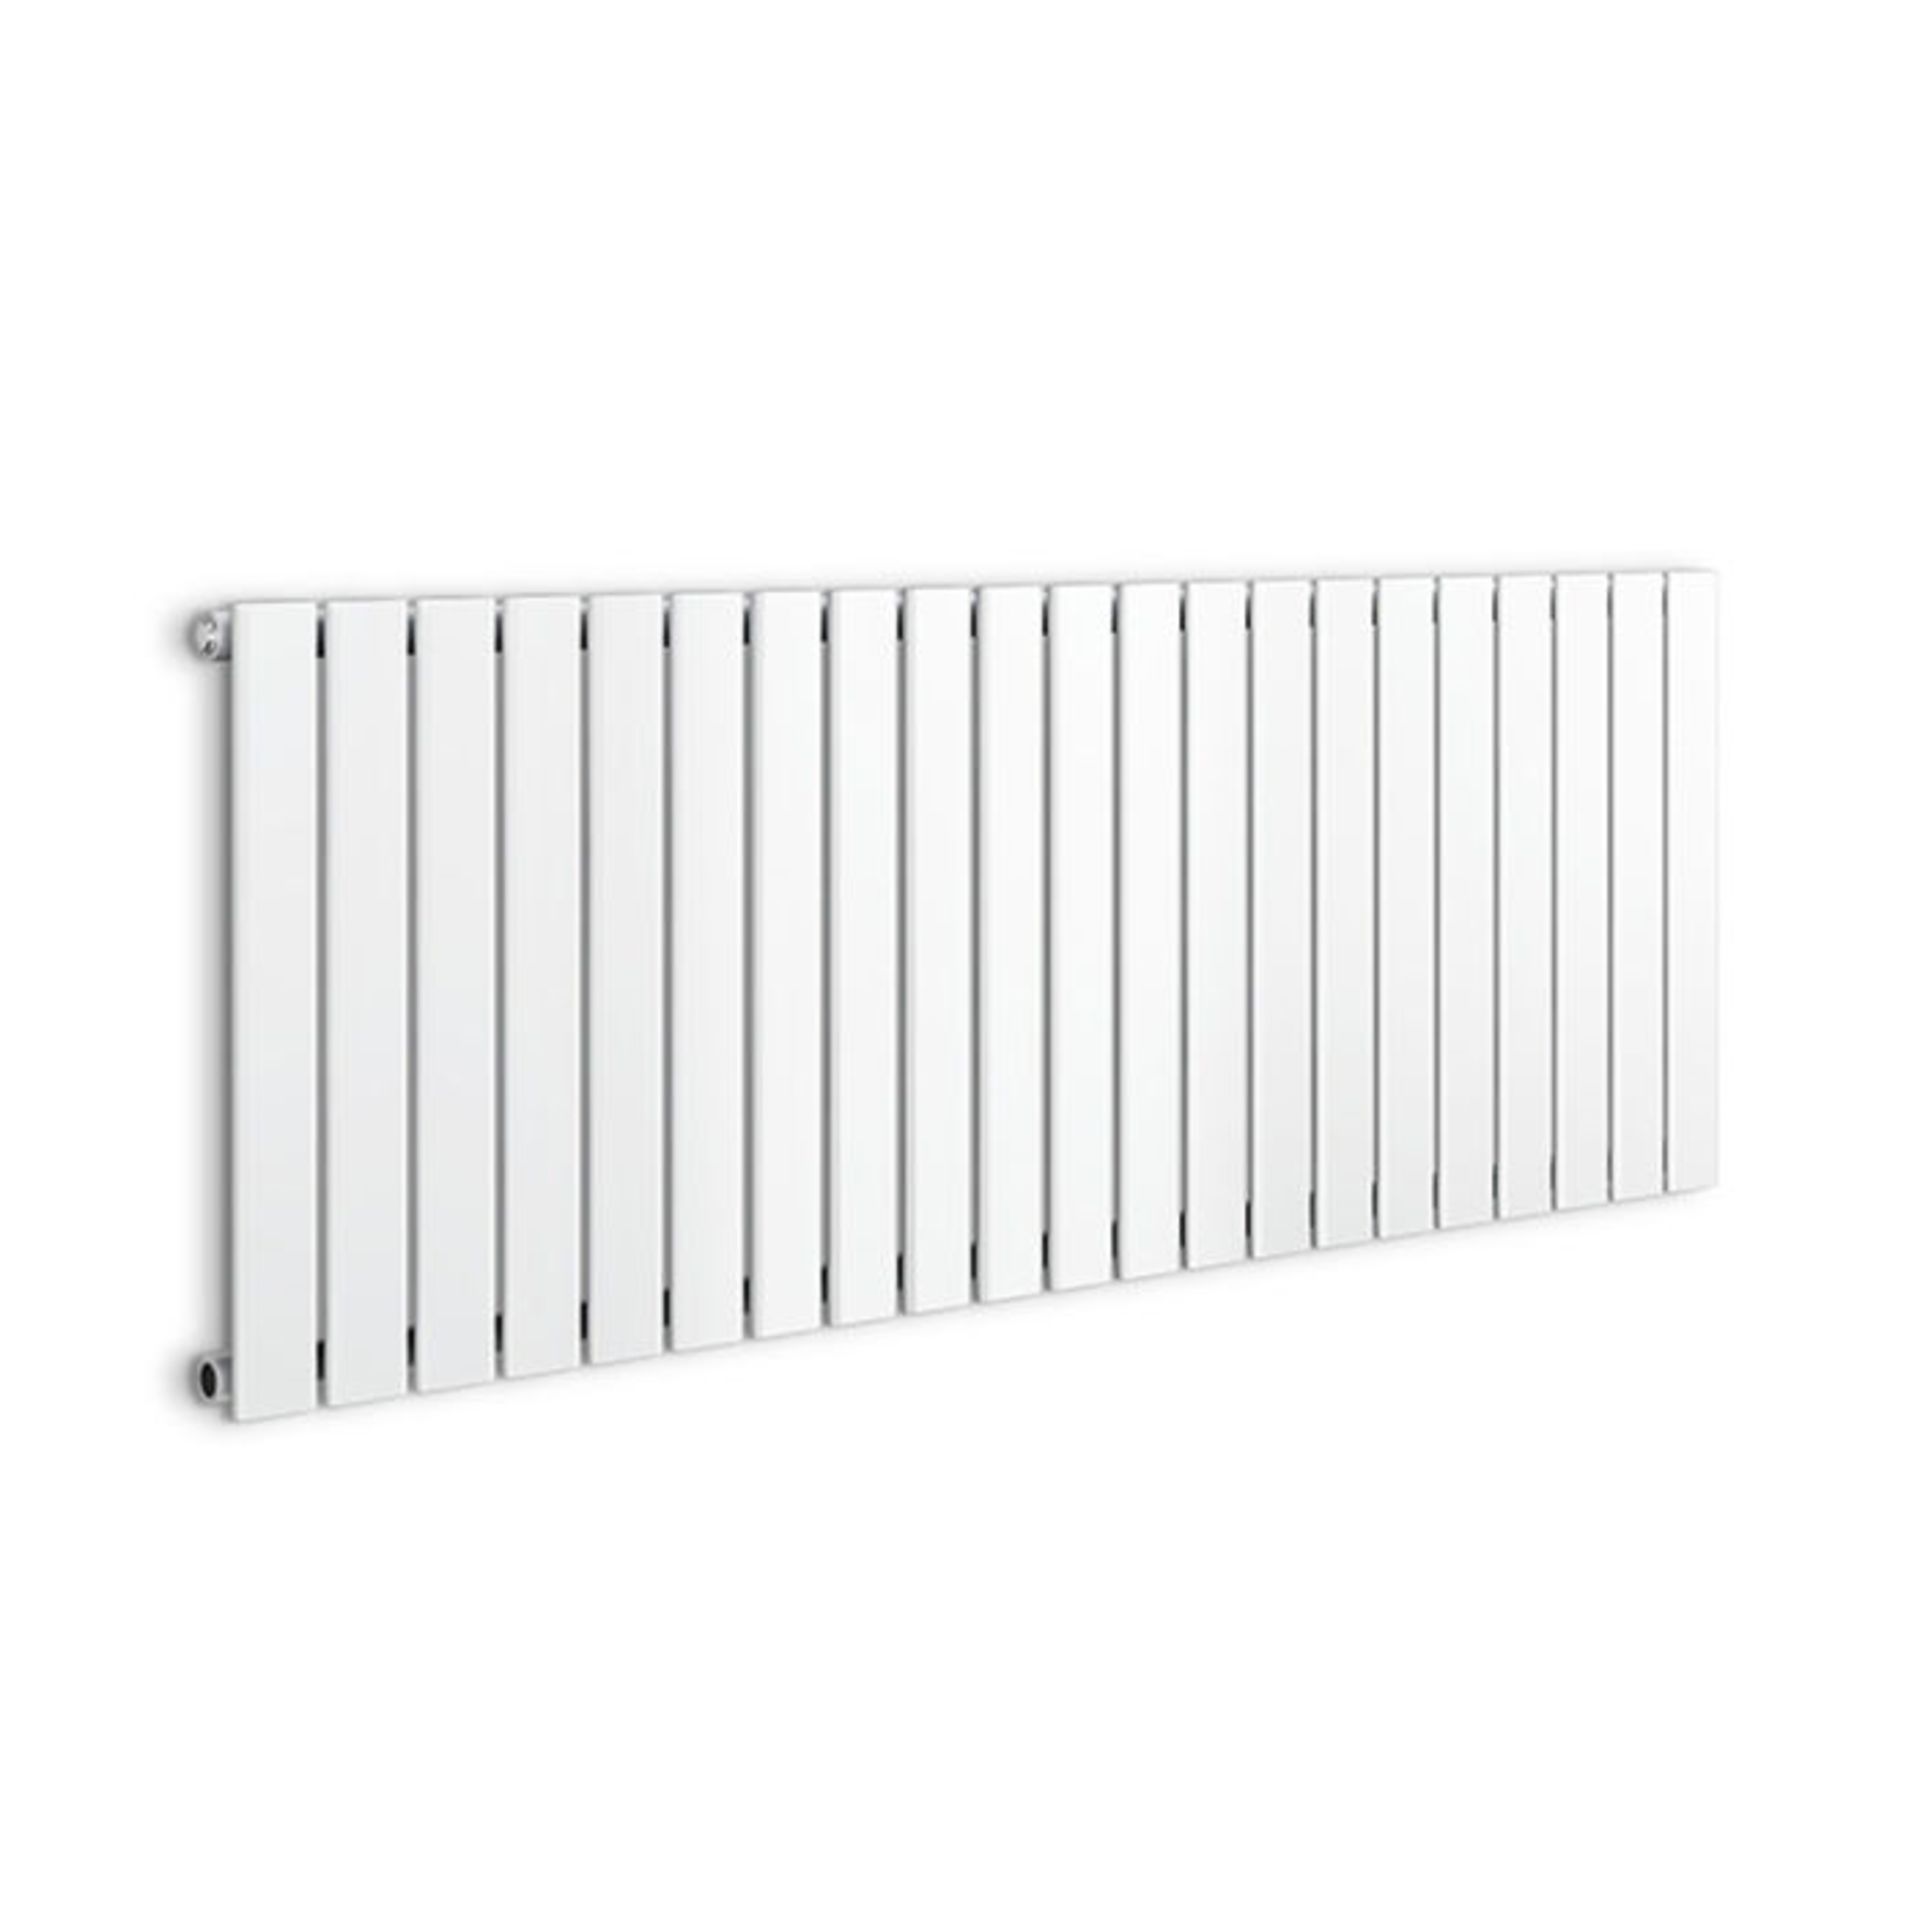 (EY214) 600x1596mm White Panel Horizontal Radiator. RRP £299.00. Made with high quality low carbon